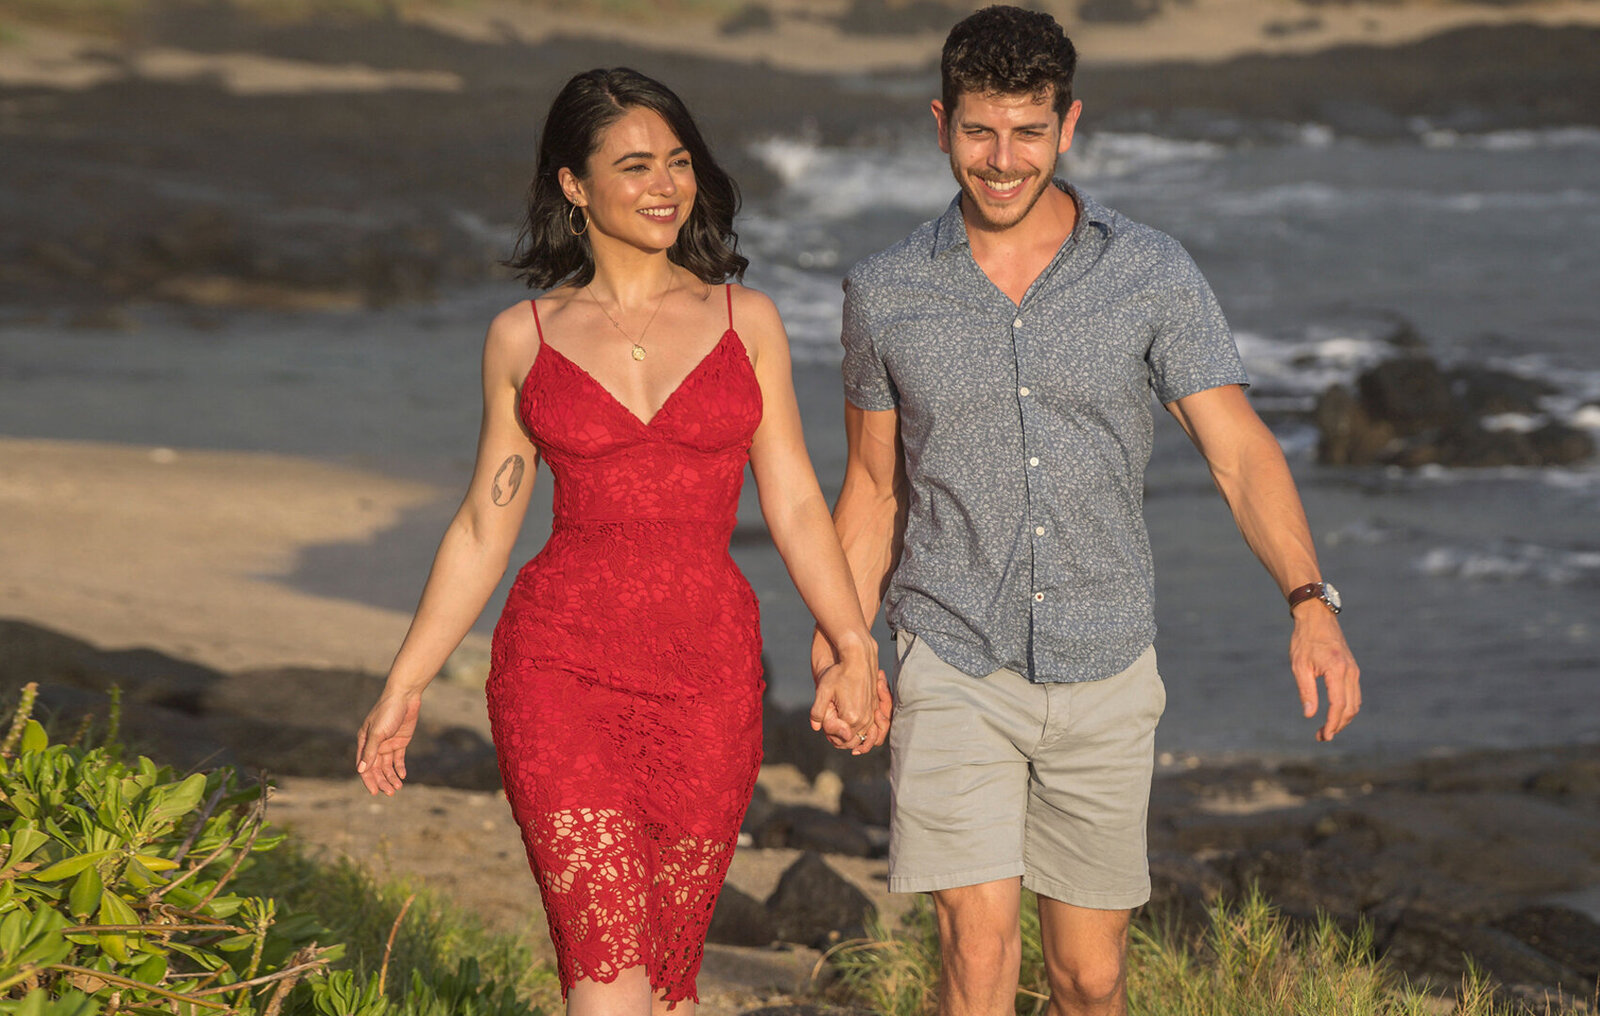 Affordable couples photographer on Maui